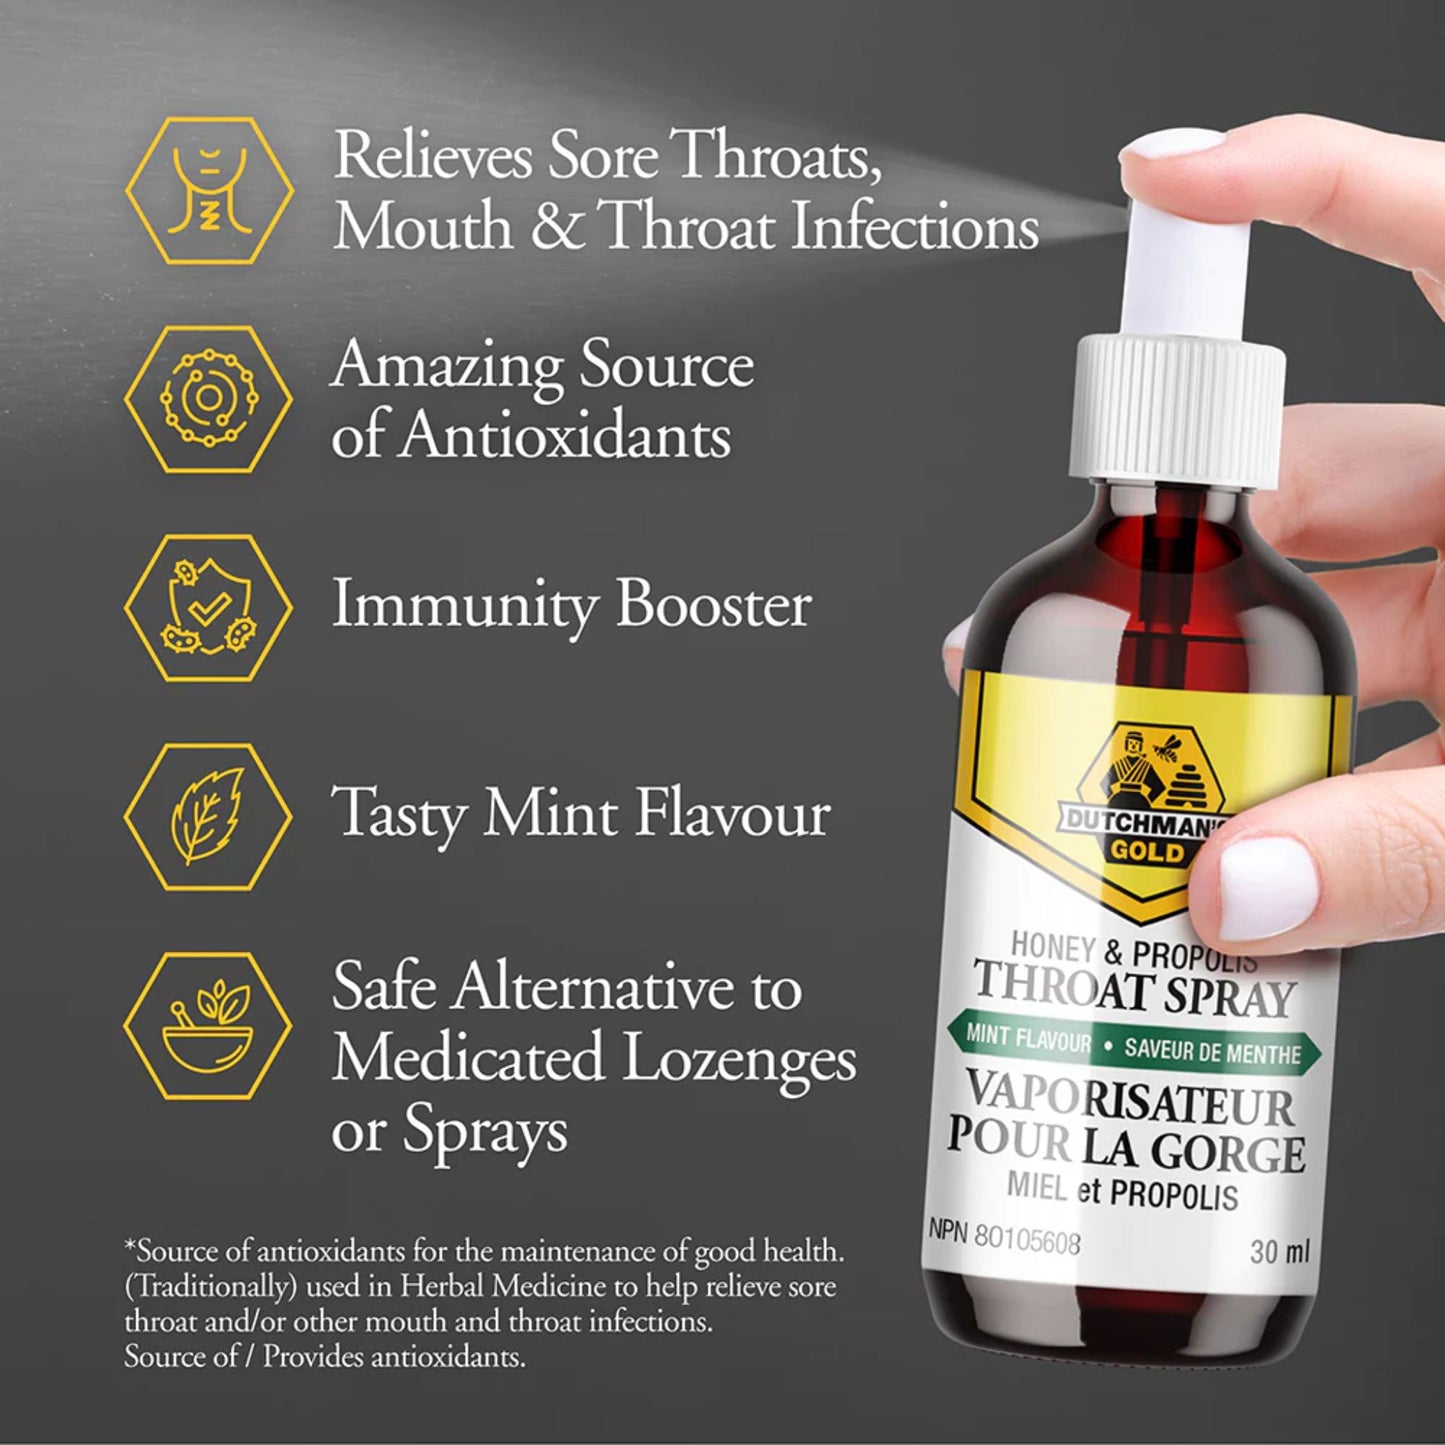 dutchmans-gold-honey-and-propolis-throat-spray-30ml-facts